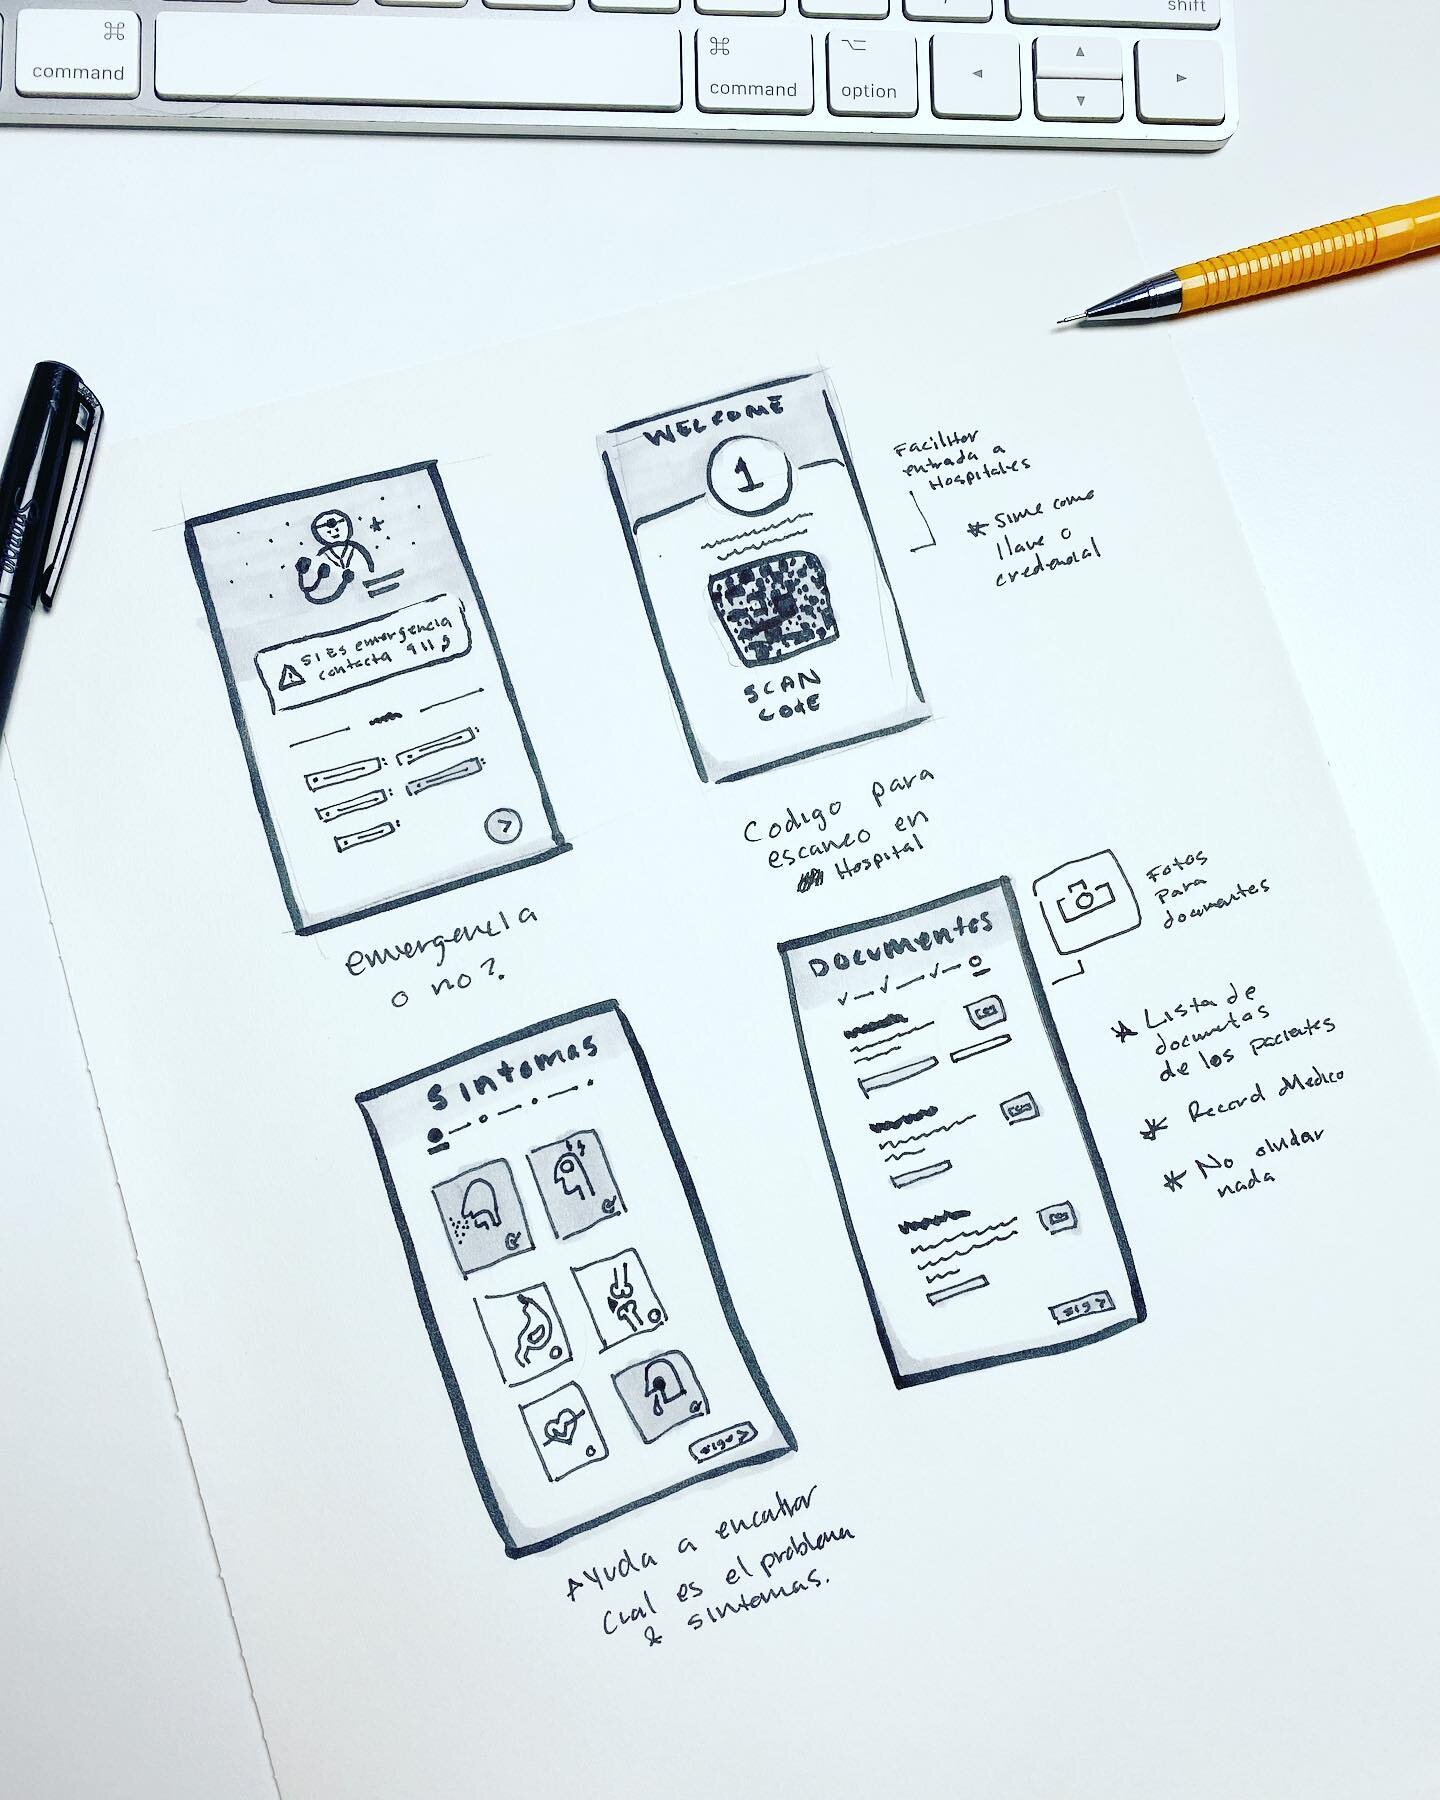 So I haven&rsquo;t been posting as usual. Just wanted to remind us all that taking a break is necessary to focus on important things and on personal goals.
.
.
With that said, here are a few sketches or wireframes from last years #uxtober from @lux_l